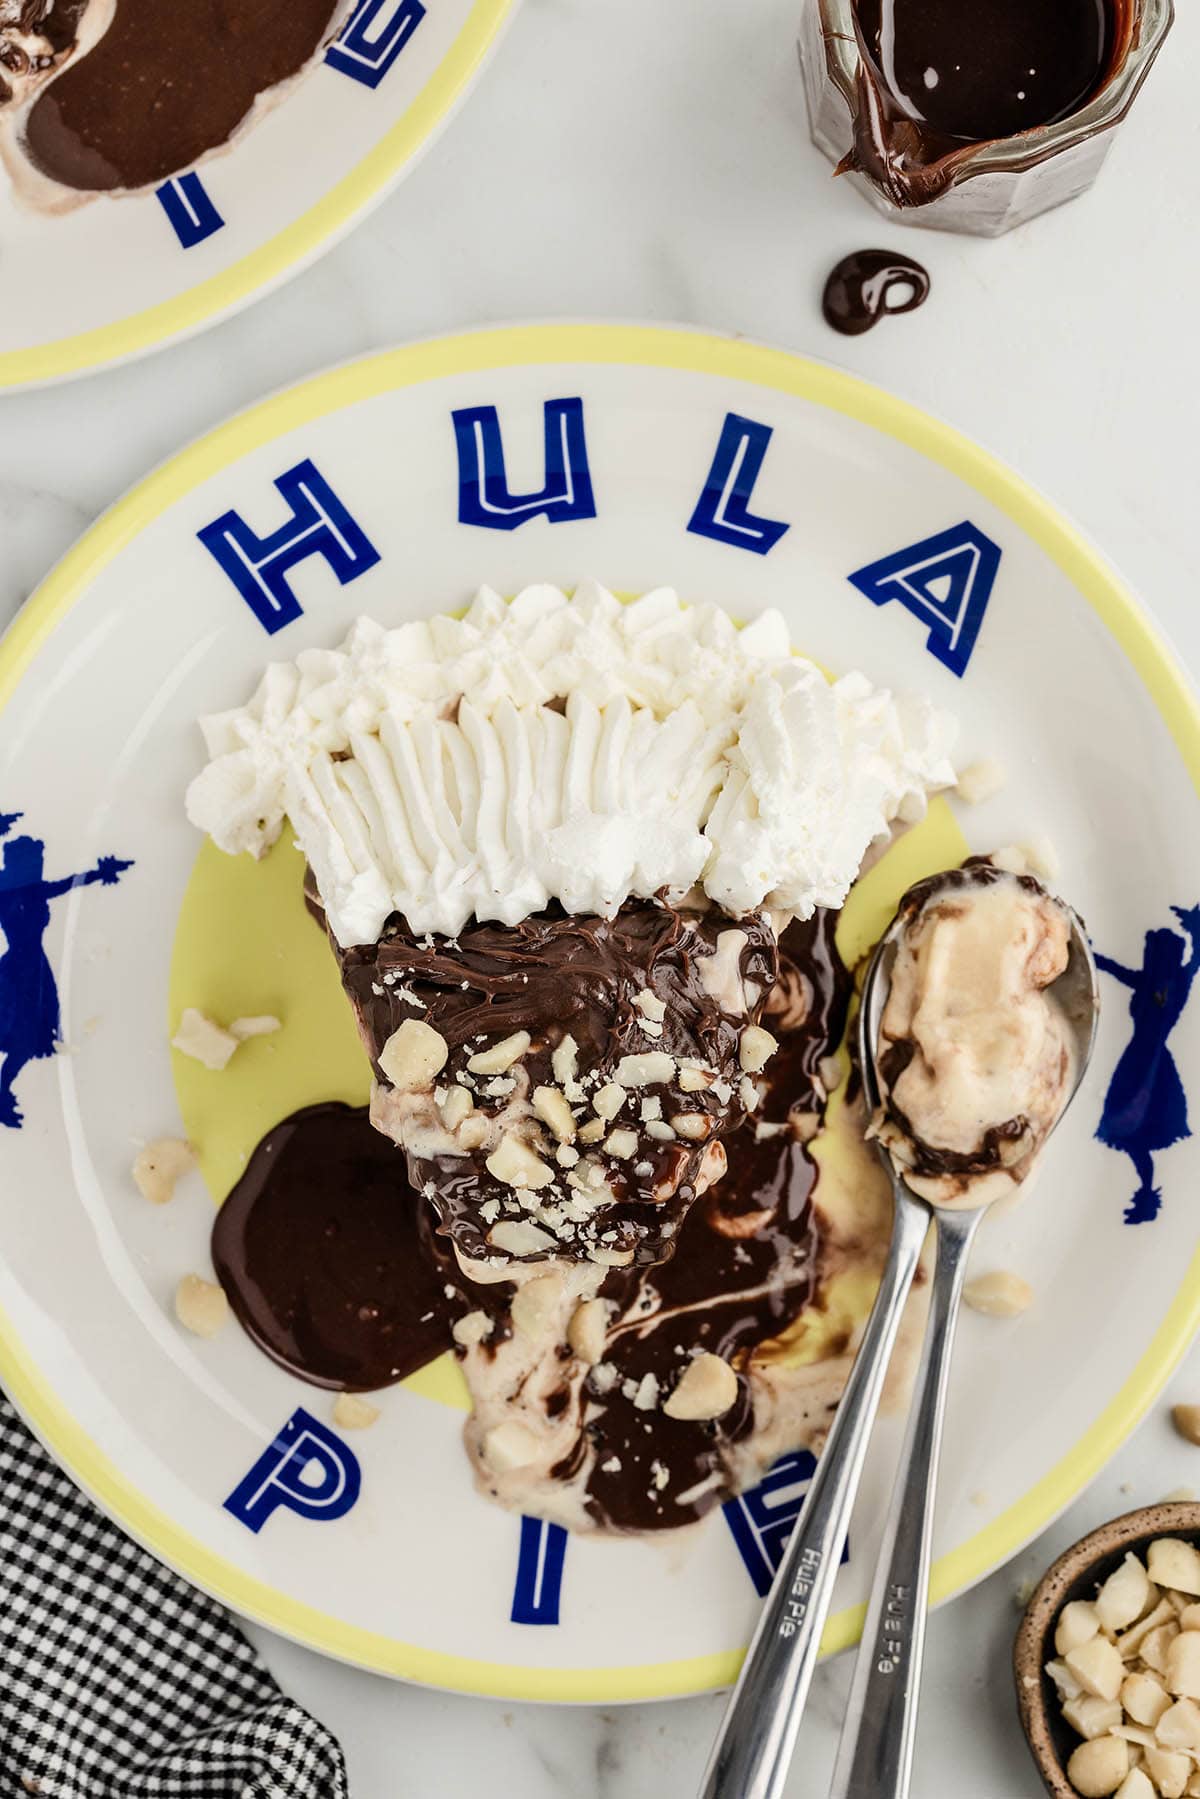 a slice of Hula Pie on the plate garnished with whipped topping and chopped nuts.